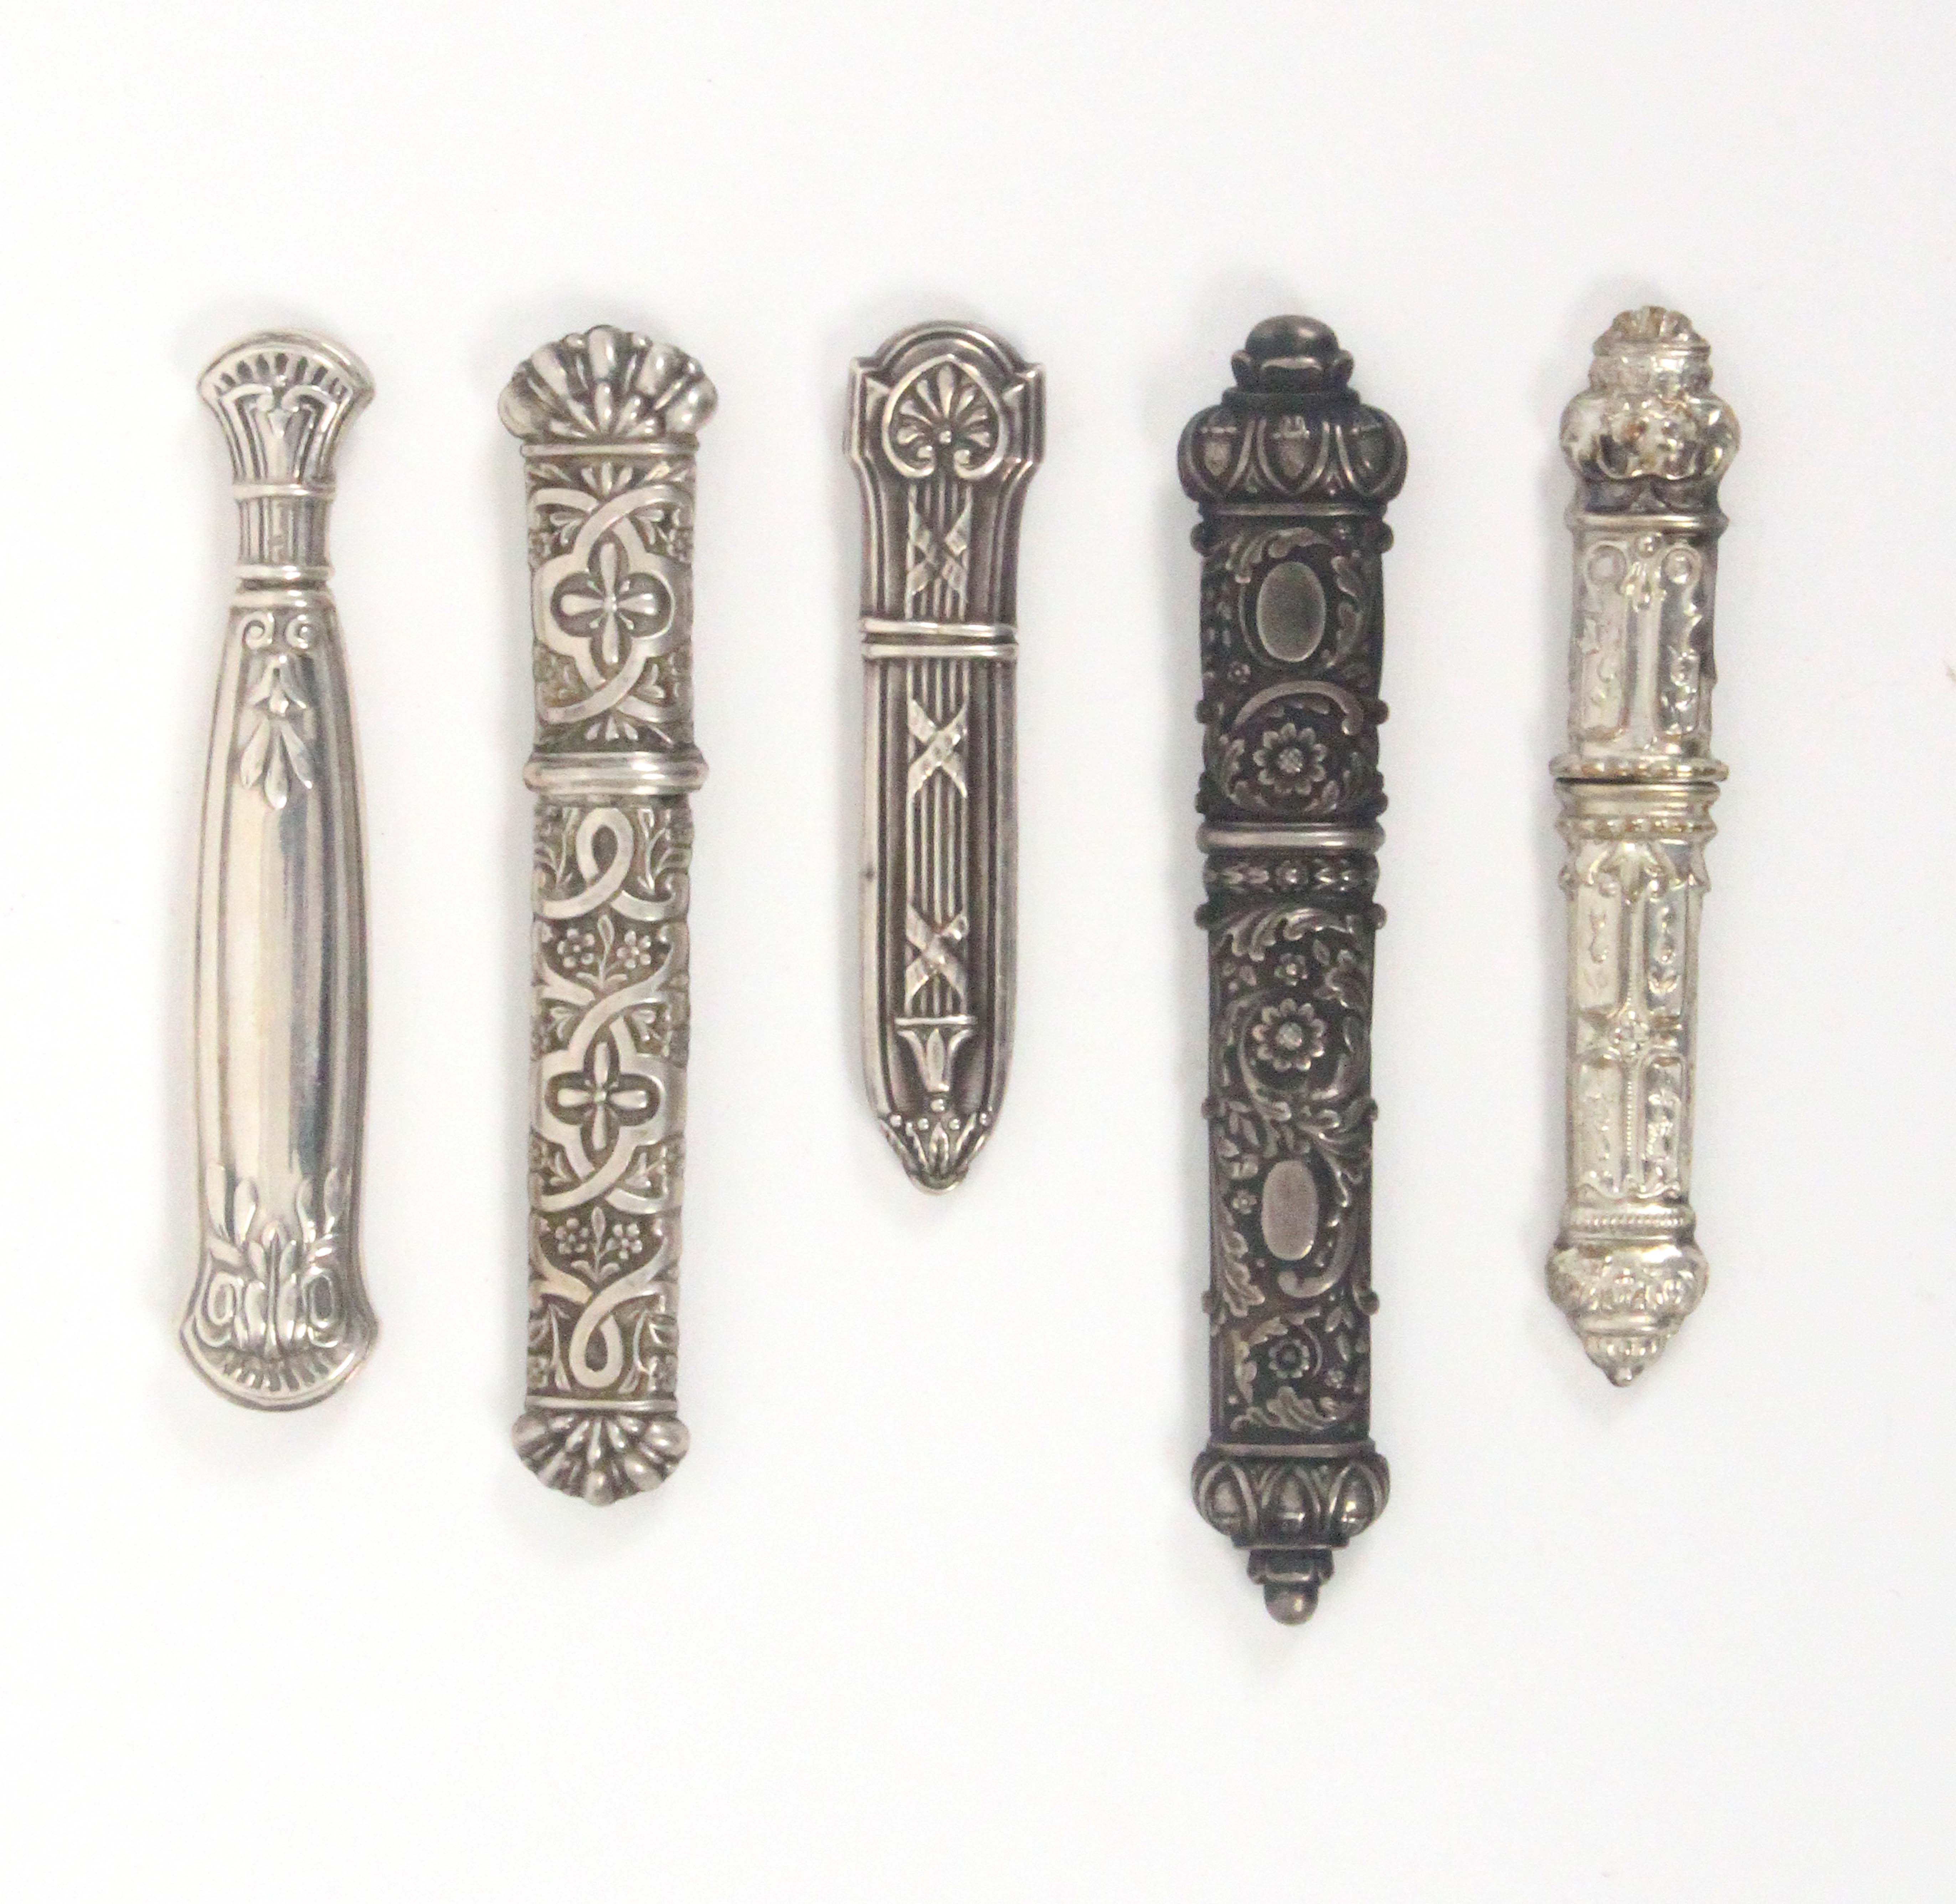 Five 19th Century and early 20th Century continental silver needle cases, all with decorative